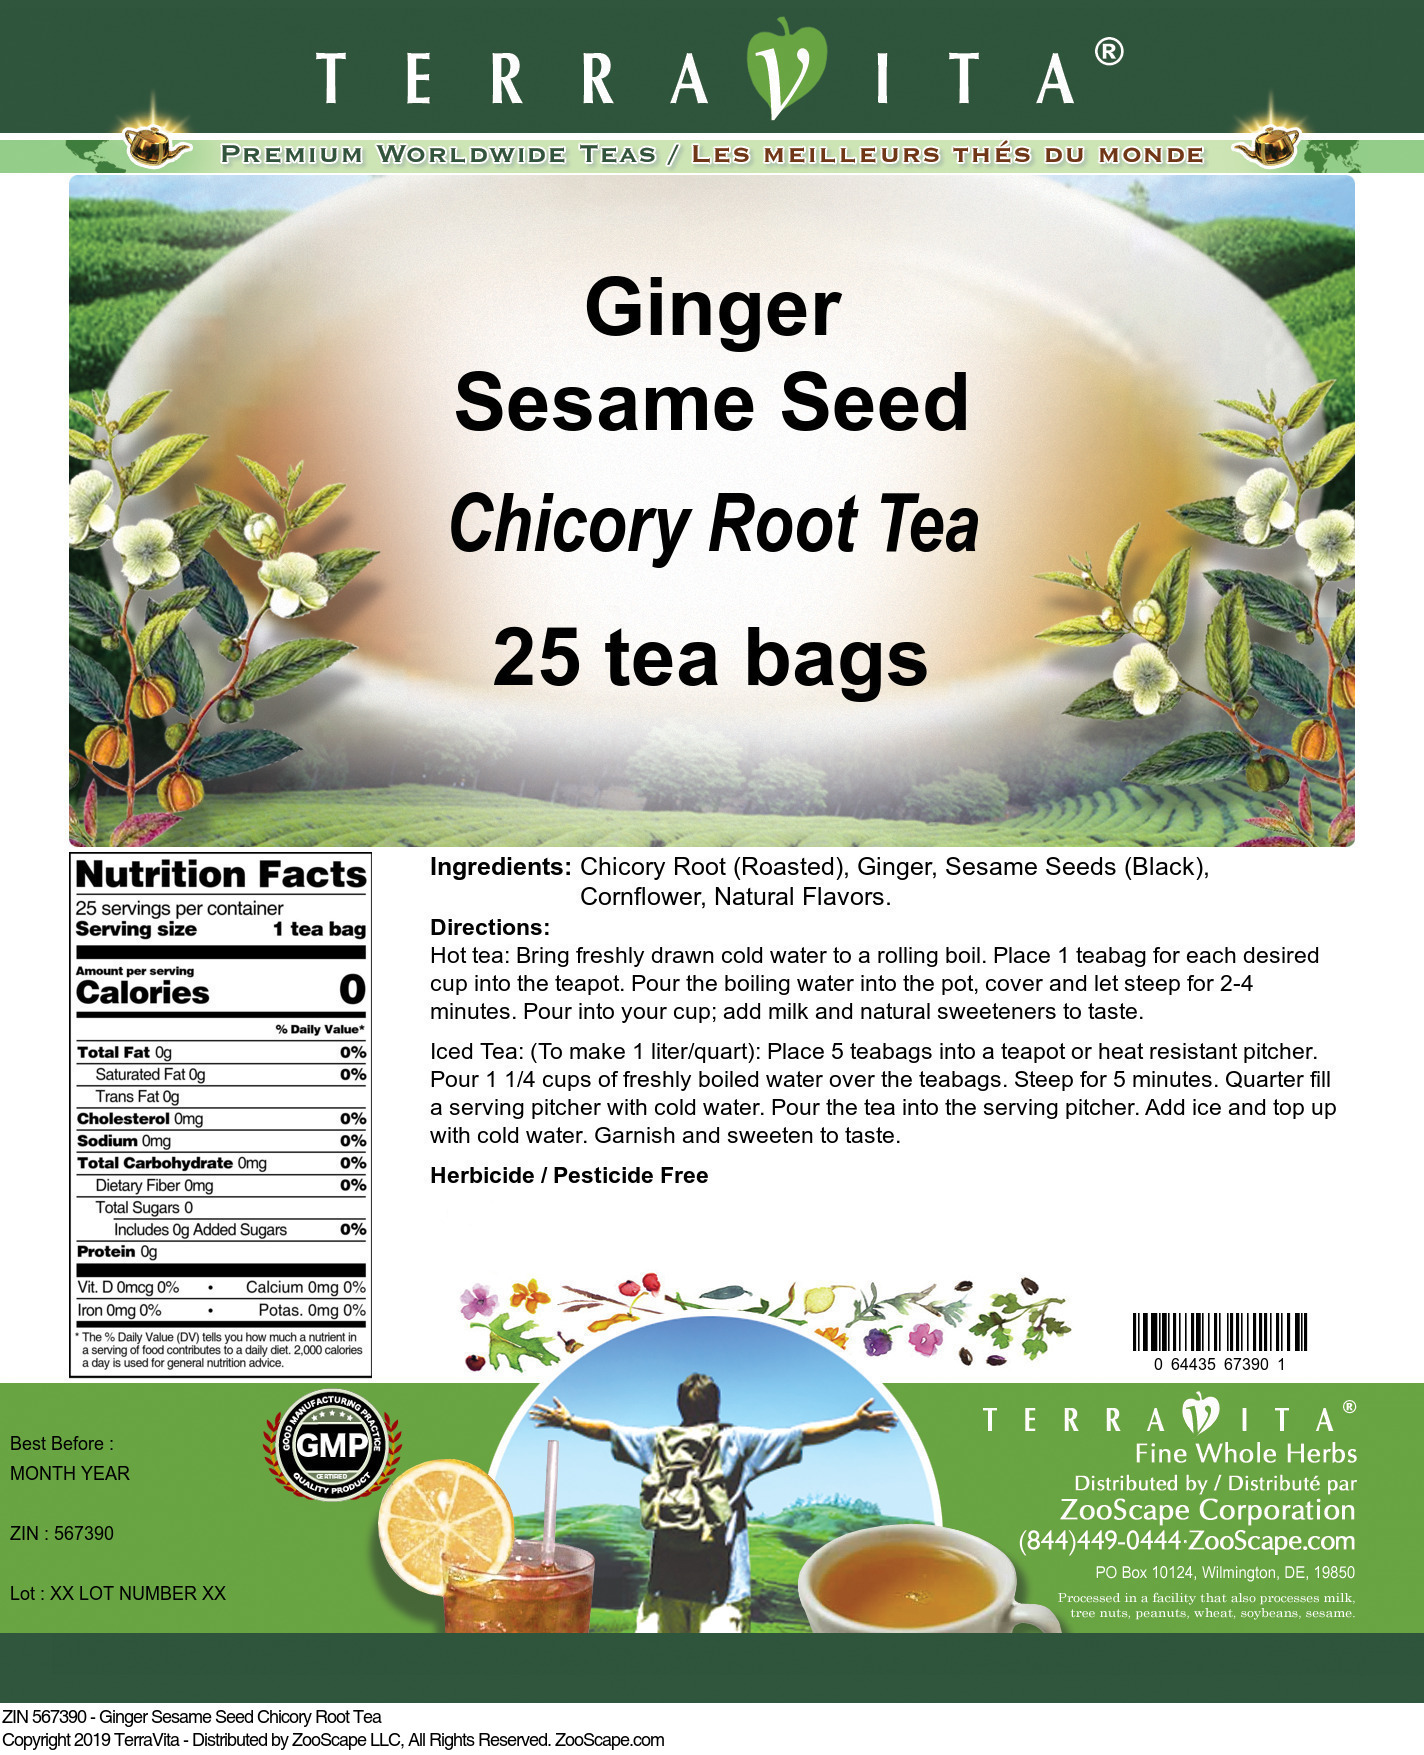 Ginger Sesame Seed Chicory Root Tea - Label